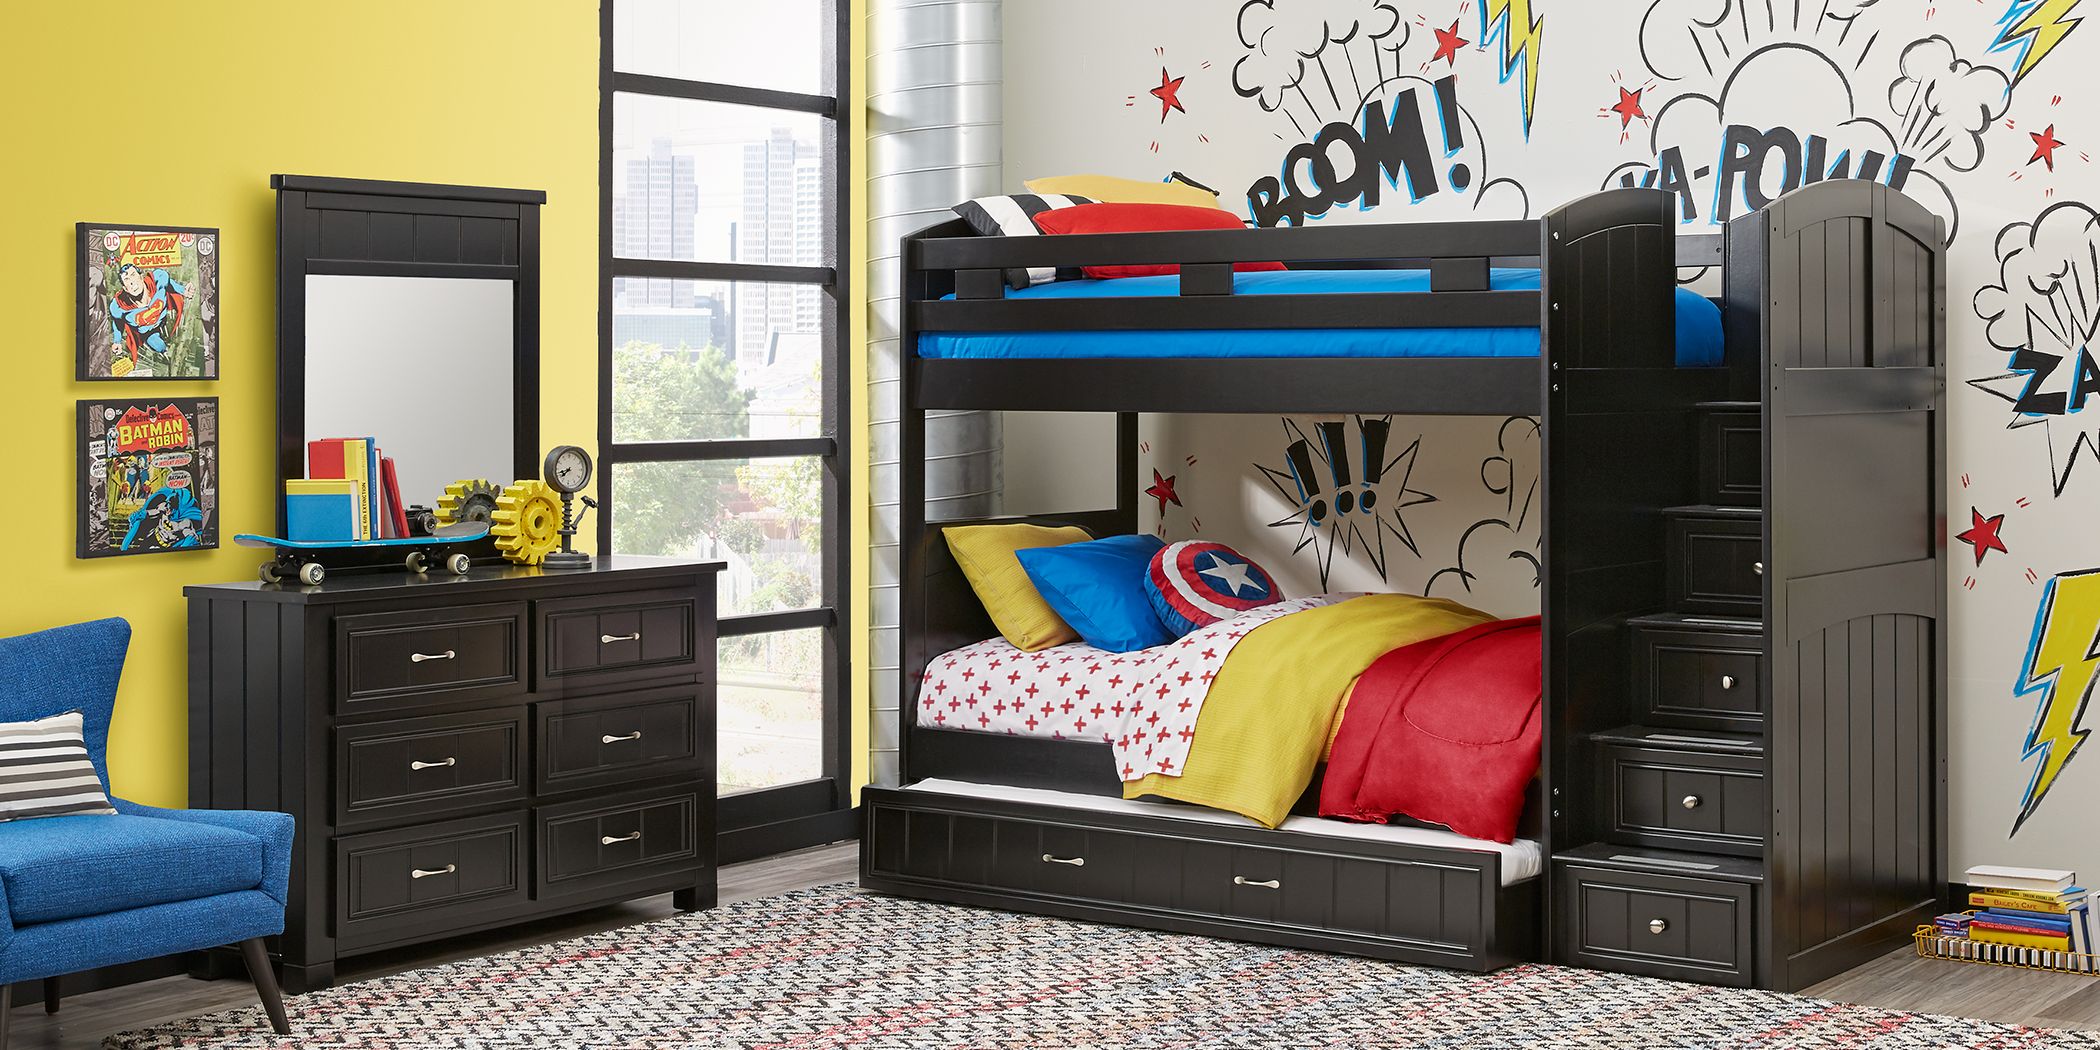 Bunk Beds With Storage Space, Canyon Furniture Twin Step Bunk Bed